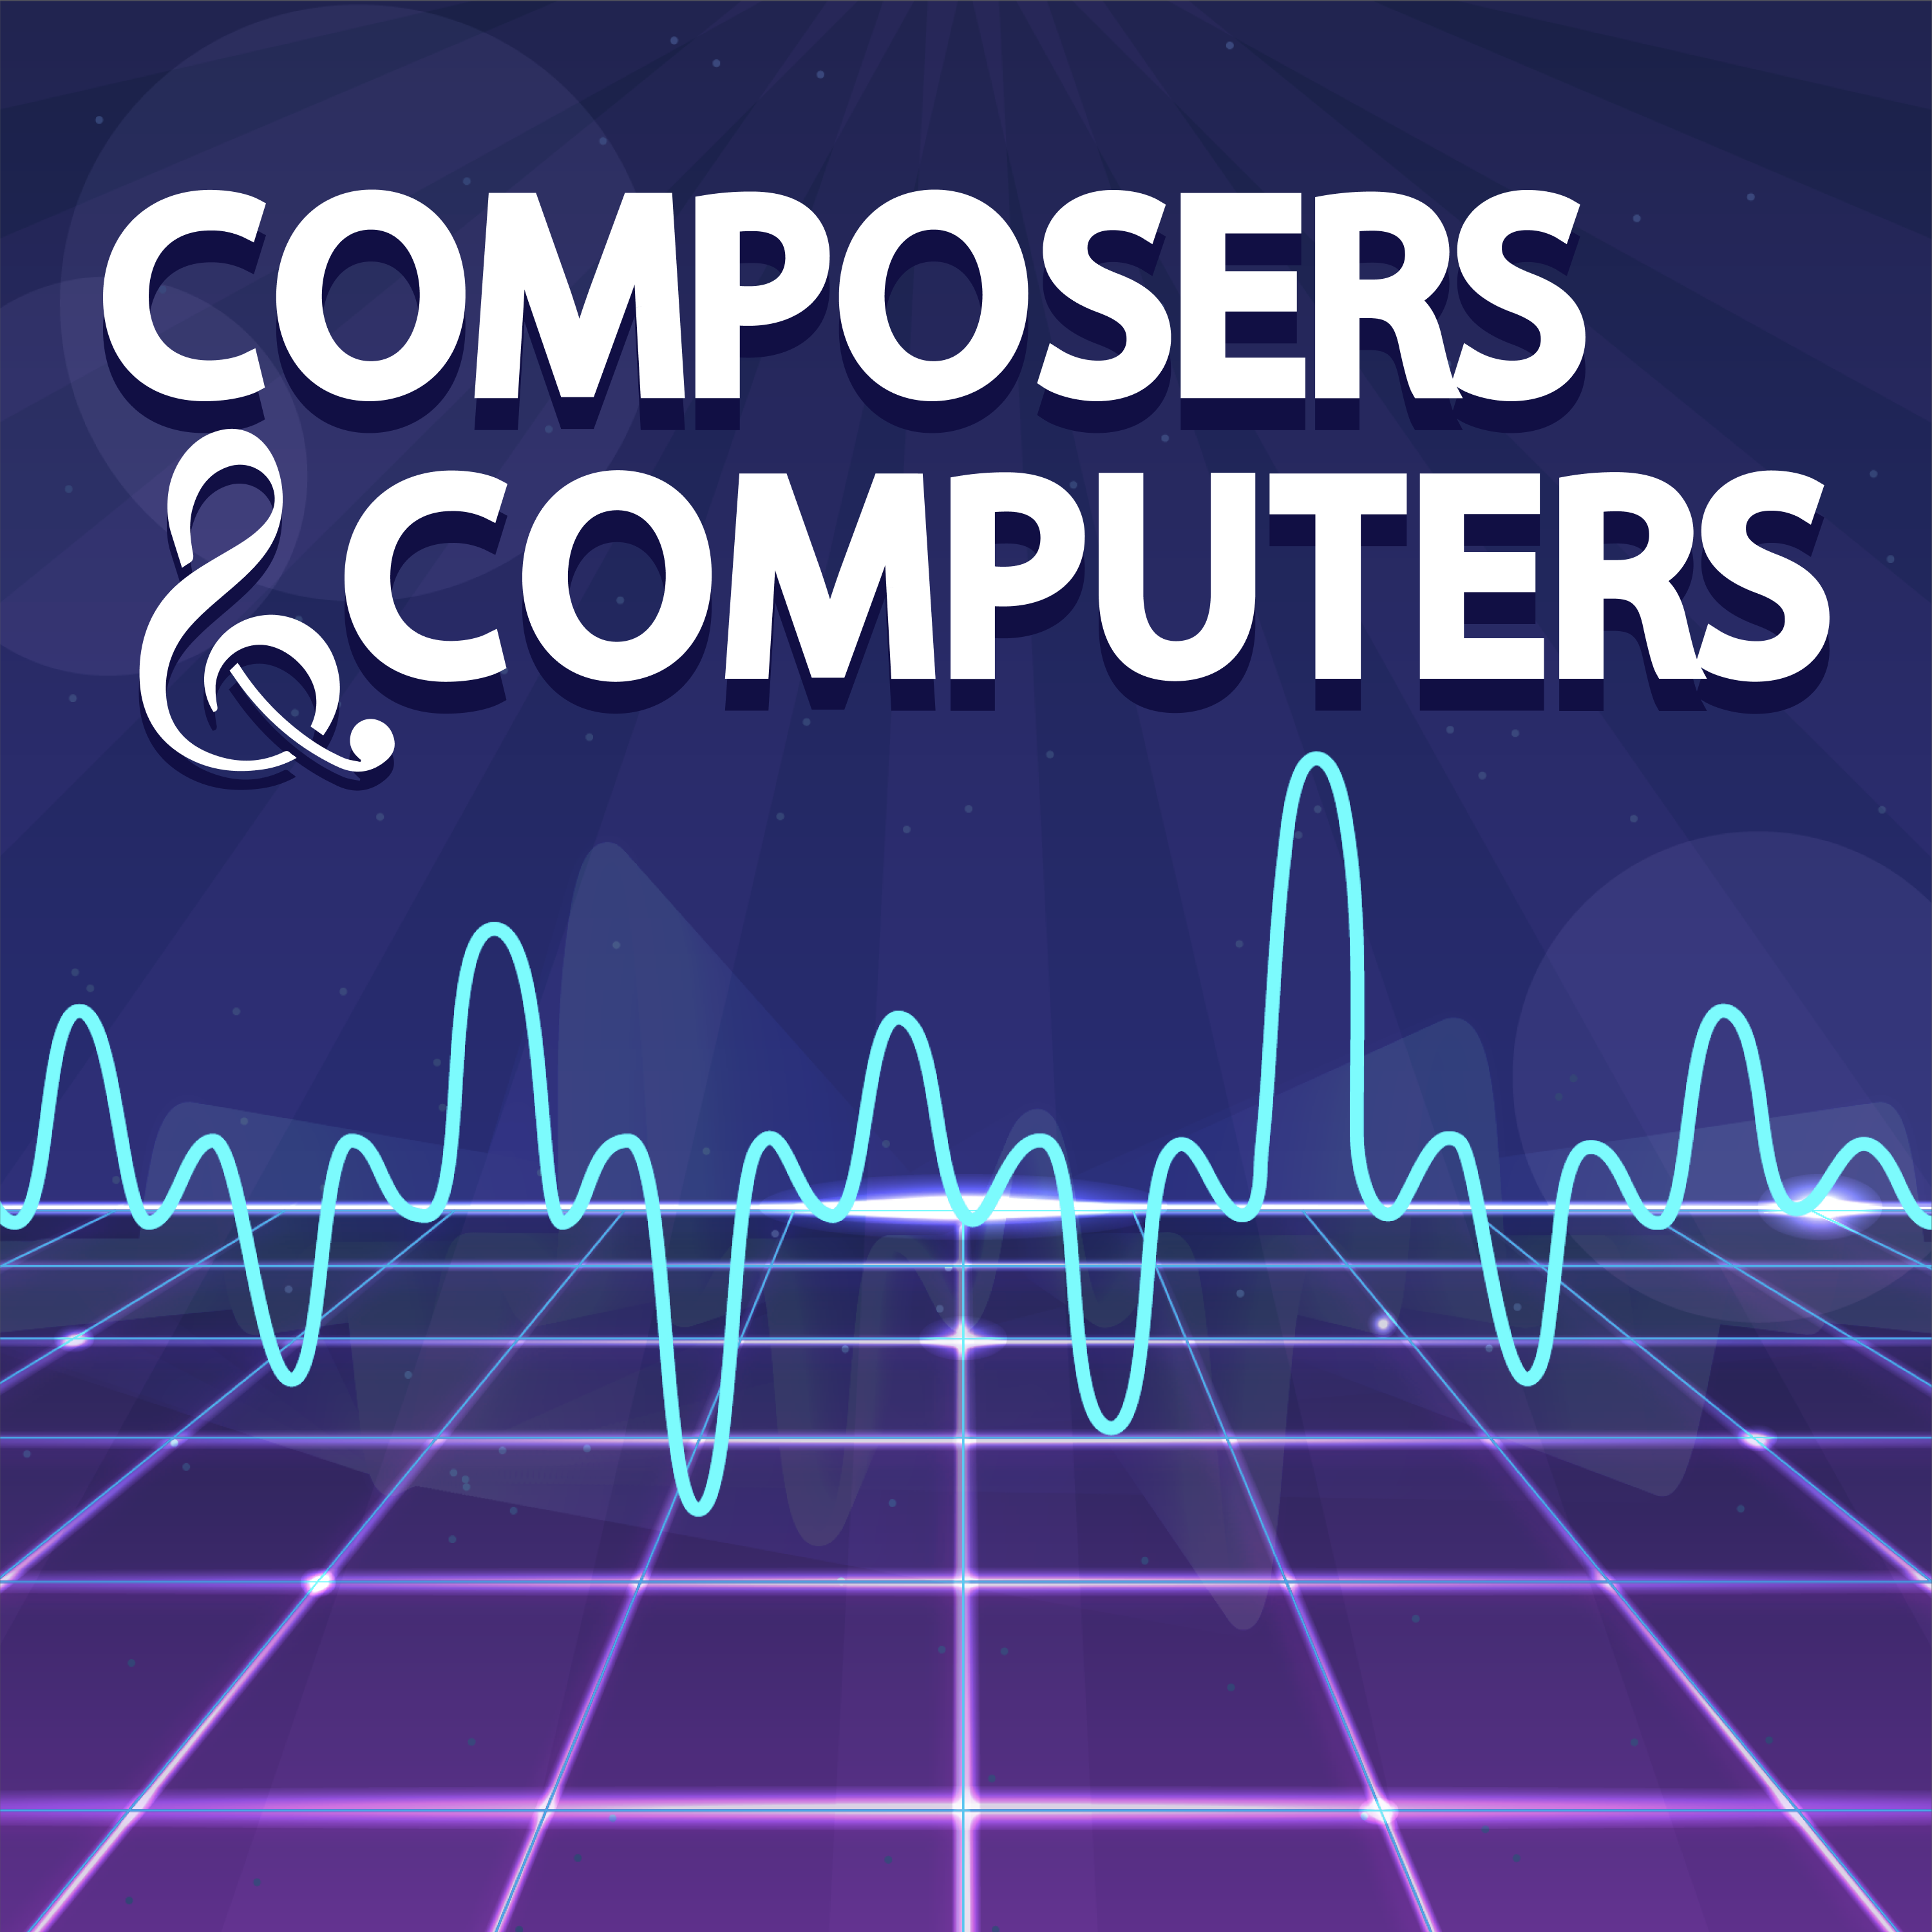 Episode 2: Composers in the Computer Center